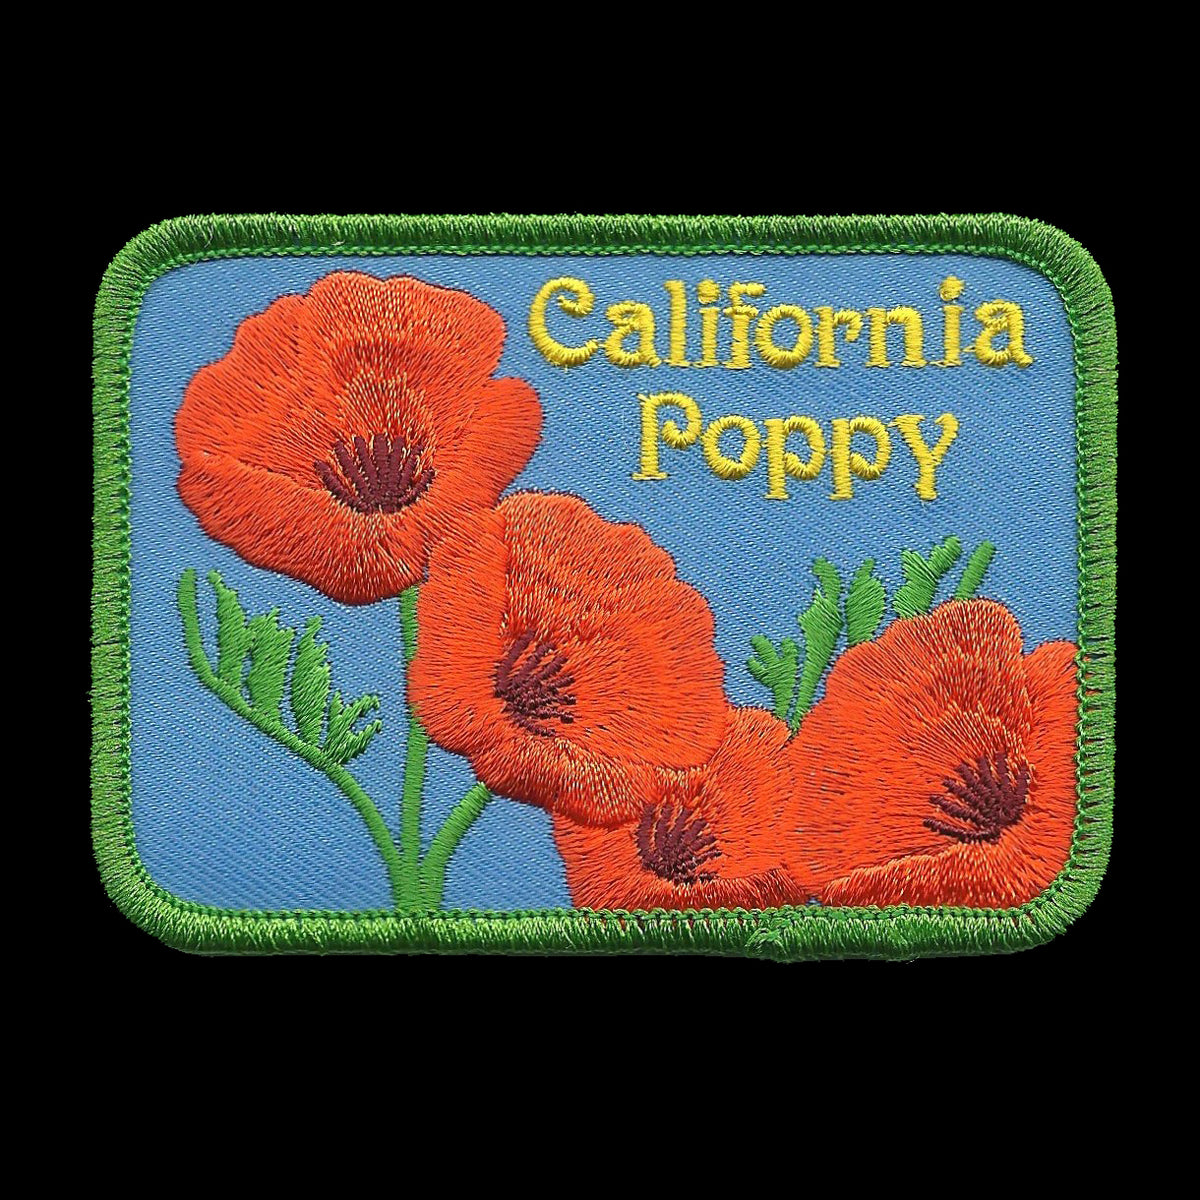 Hot Sale Lest We Forget Remembrance Iron on Embroidery Poppy Flower Patches  - China Iron on Embroidery Flower Patches and Embroidery Poppy Patch price